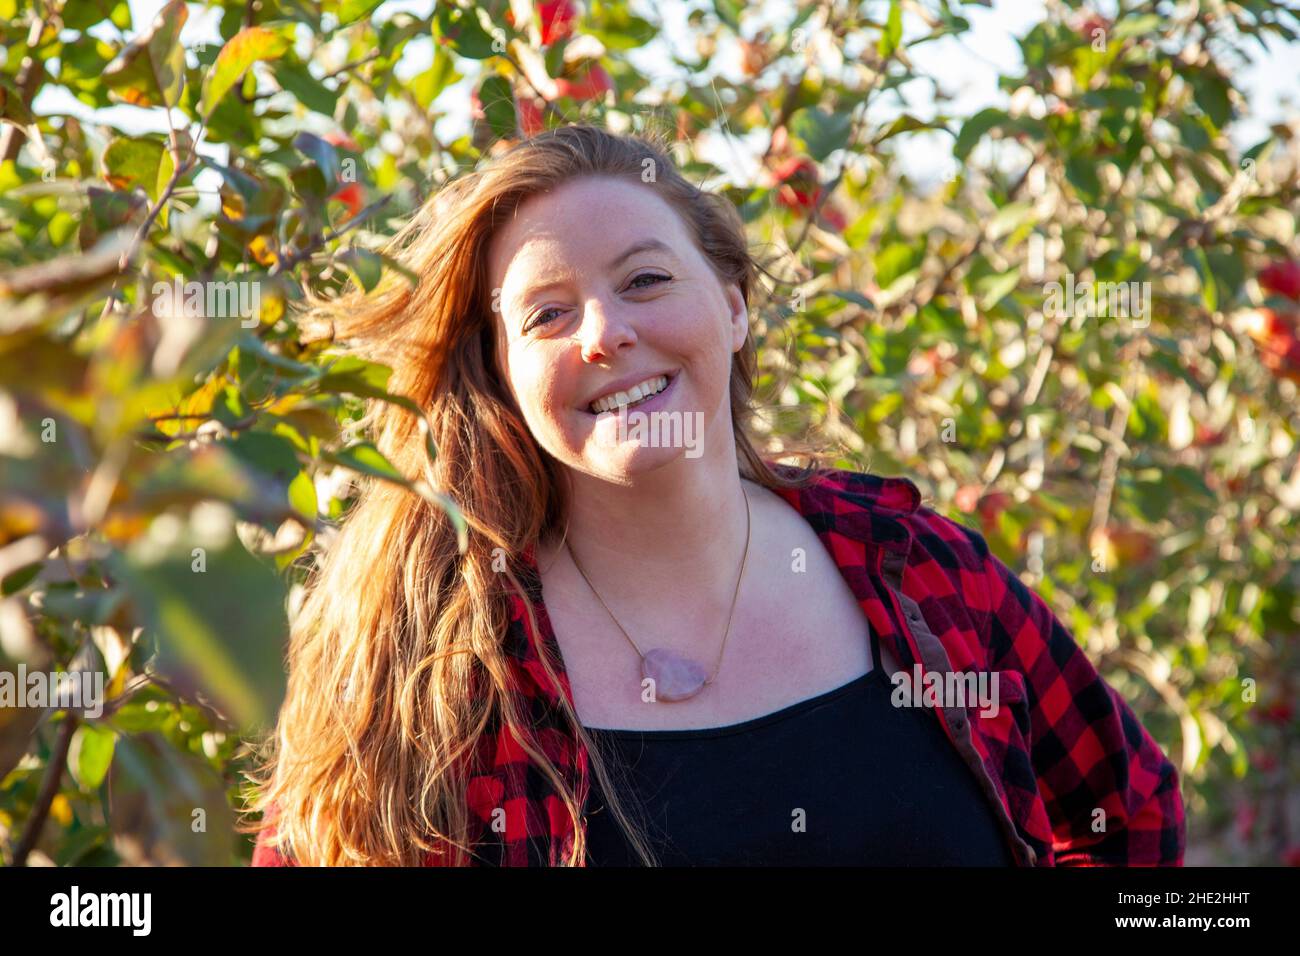 beautiful woman with a lovely smile and red hair grins in her apple orchard Stock Photo